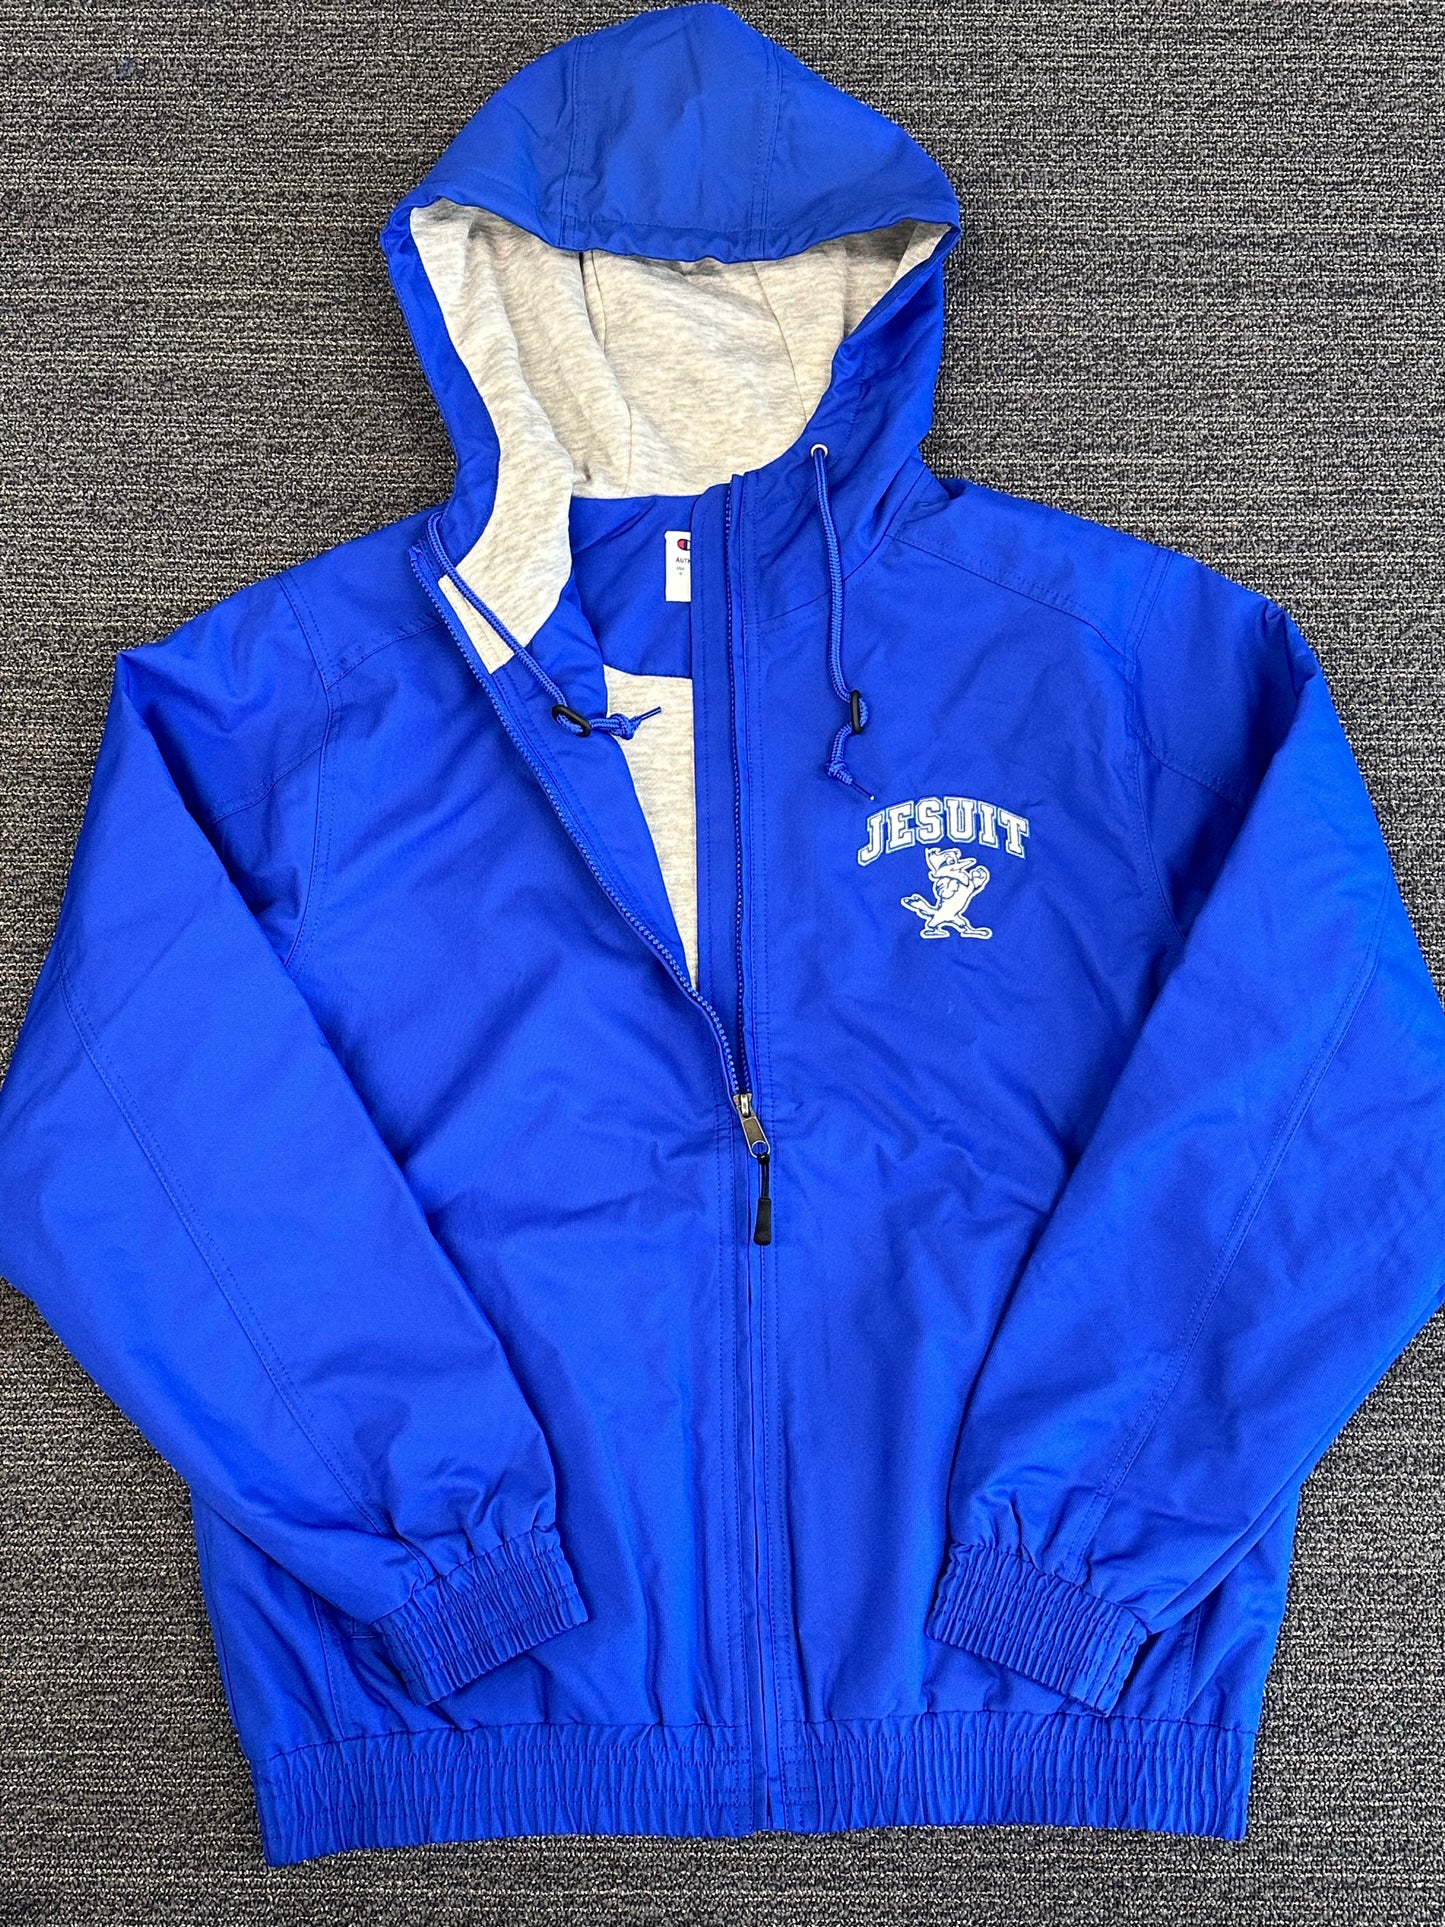 Champion.  Outer:  100% Polyester - Water Resistant.  Jersey Knit Lining:  61% Polyester/27% Cotton/12% Rayon.  Scuba collar w/hood including adjustable drawcords.  Self fabrics at waistband & cuff w/elastic to block wind.  Roll forward should, 3 piece hood & sleeve.